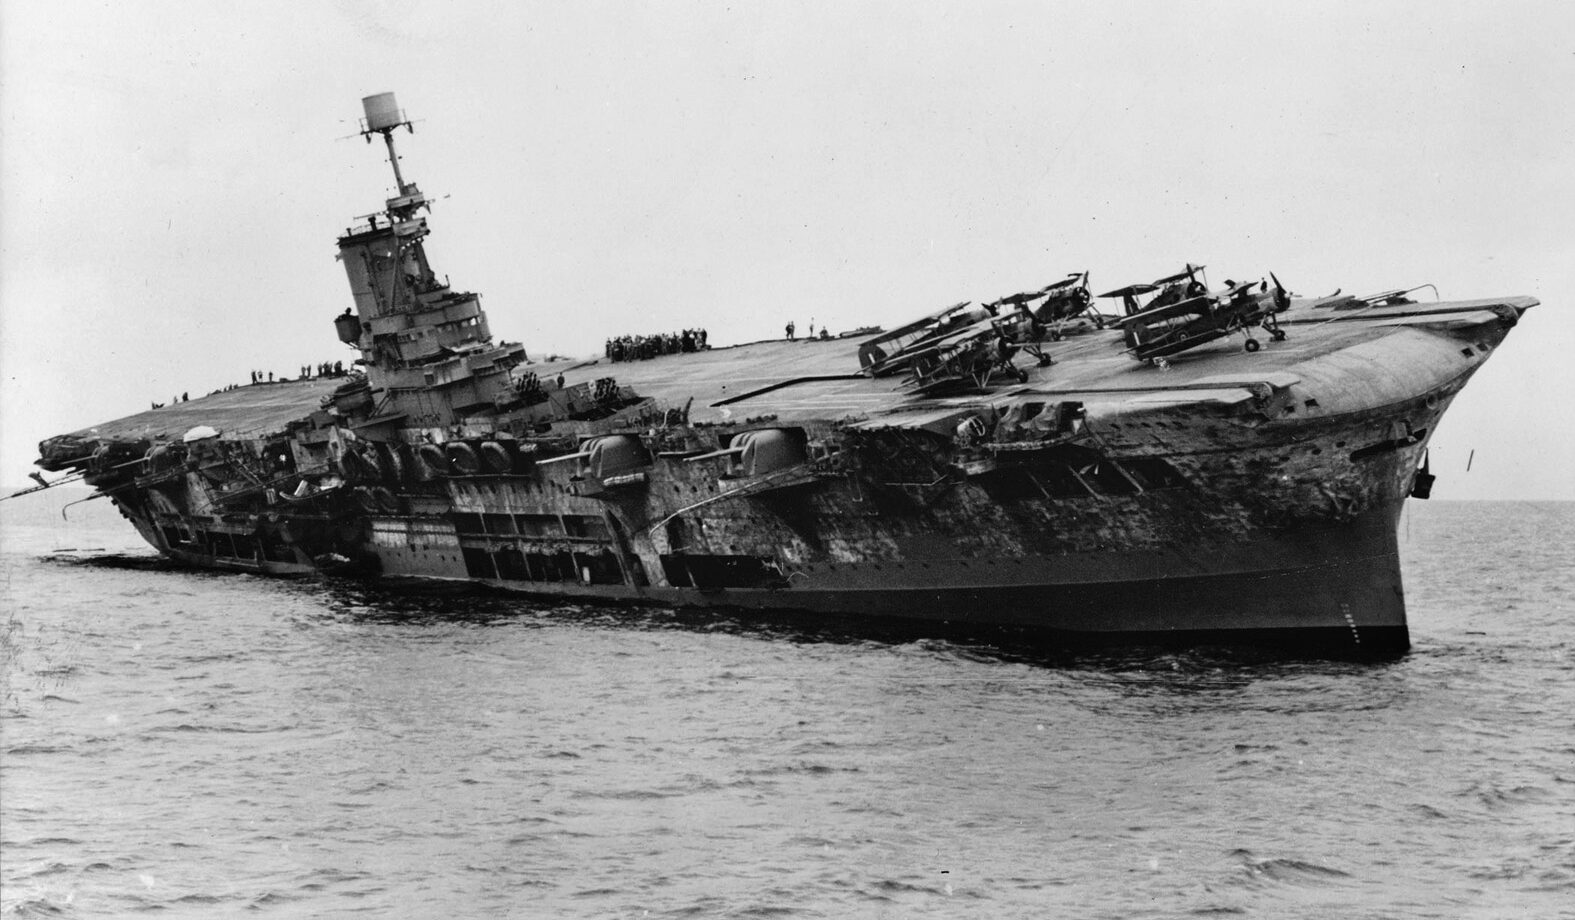 British aircraft carrier HMS Ark Royal lists heavily after being torpedoed off Gibraltar by U-81, November 13, 1941, necessitating American carriers to ferry aircraft to Malta in 1942.